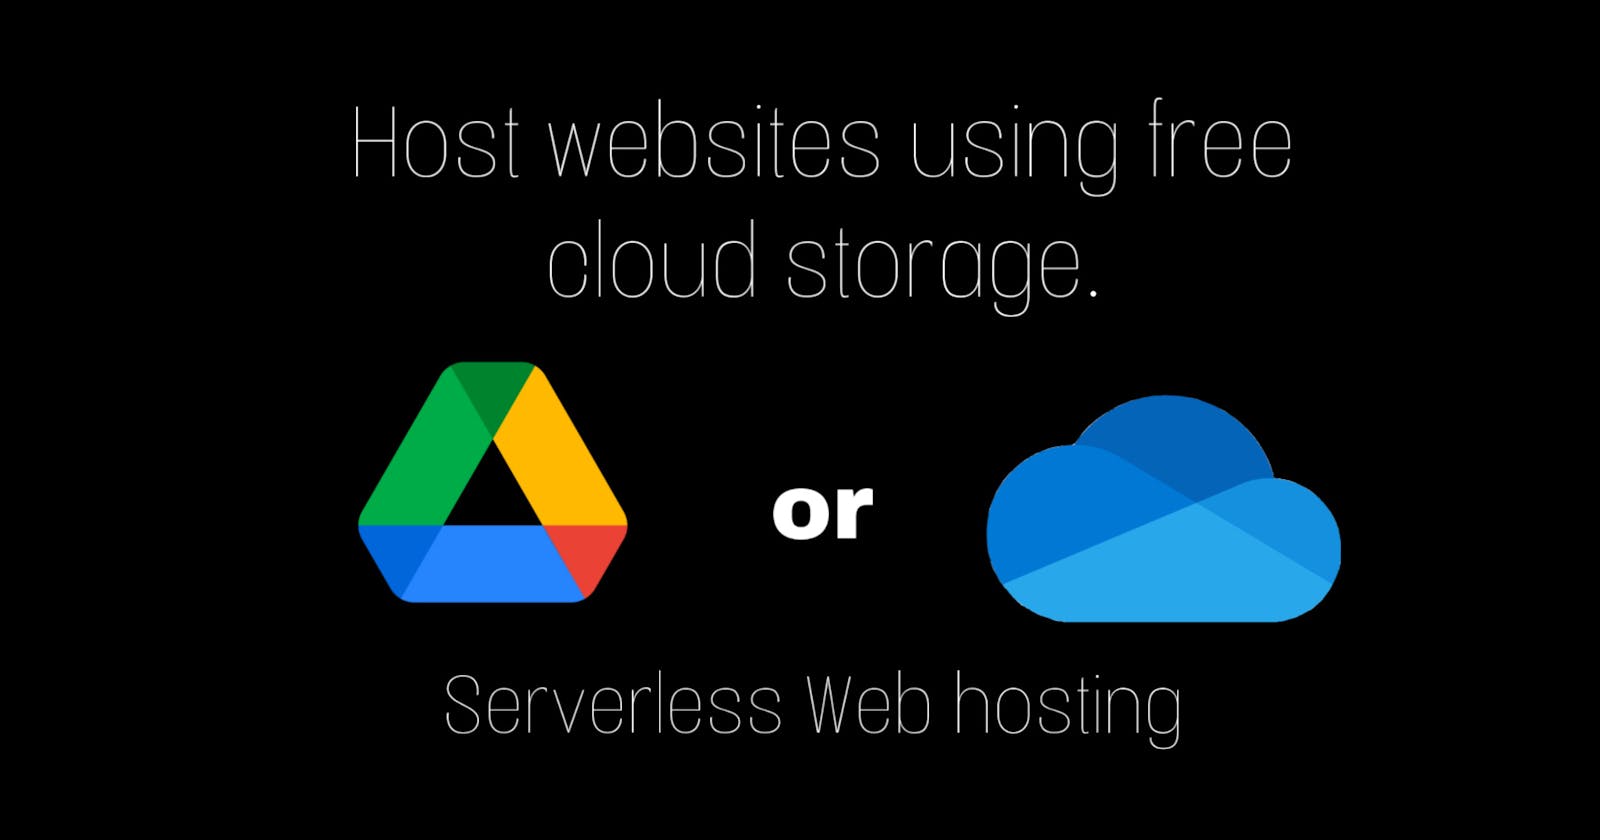 How to host websites using free cloud storage